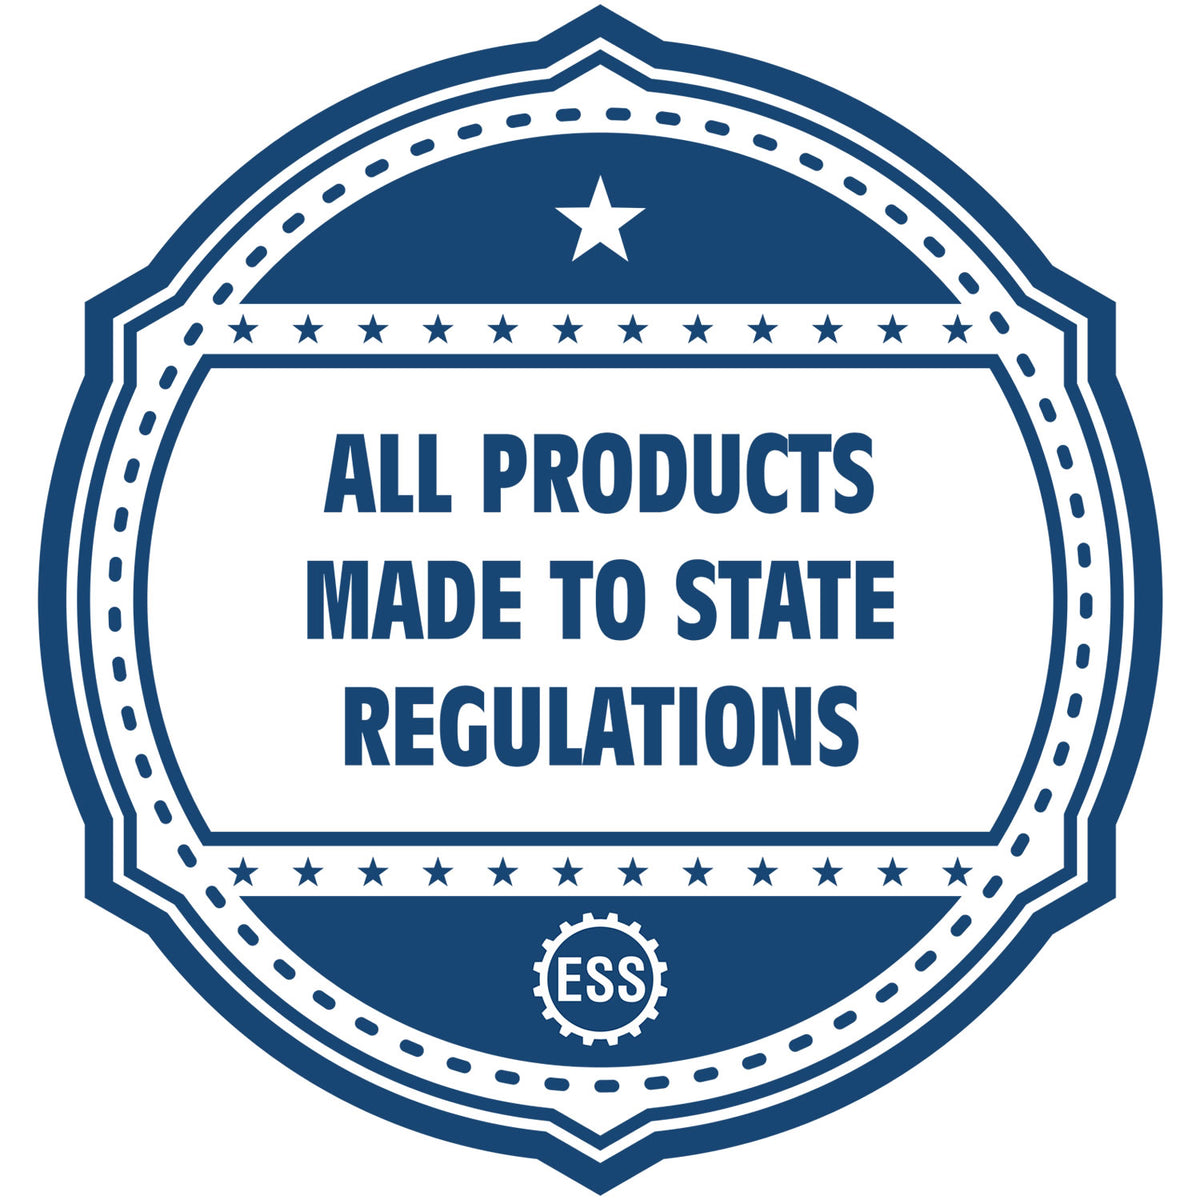 An icon or badge element for the Connecticut Engineer Desk Seal showing that this product is made in compliance with state regulations.